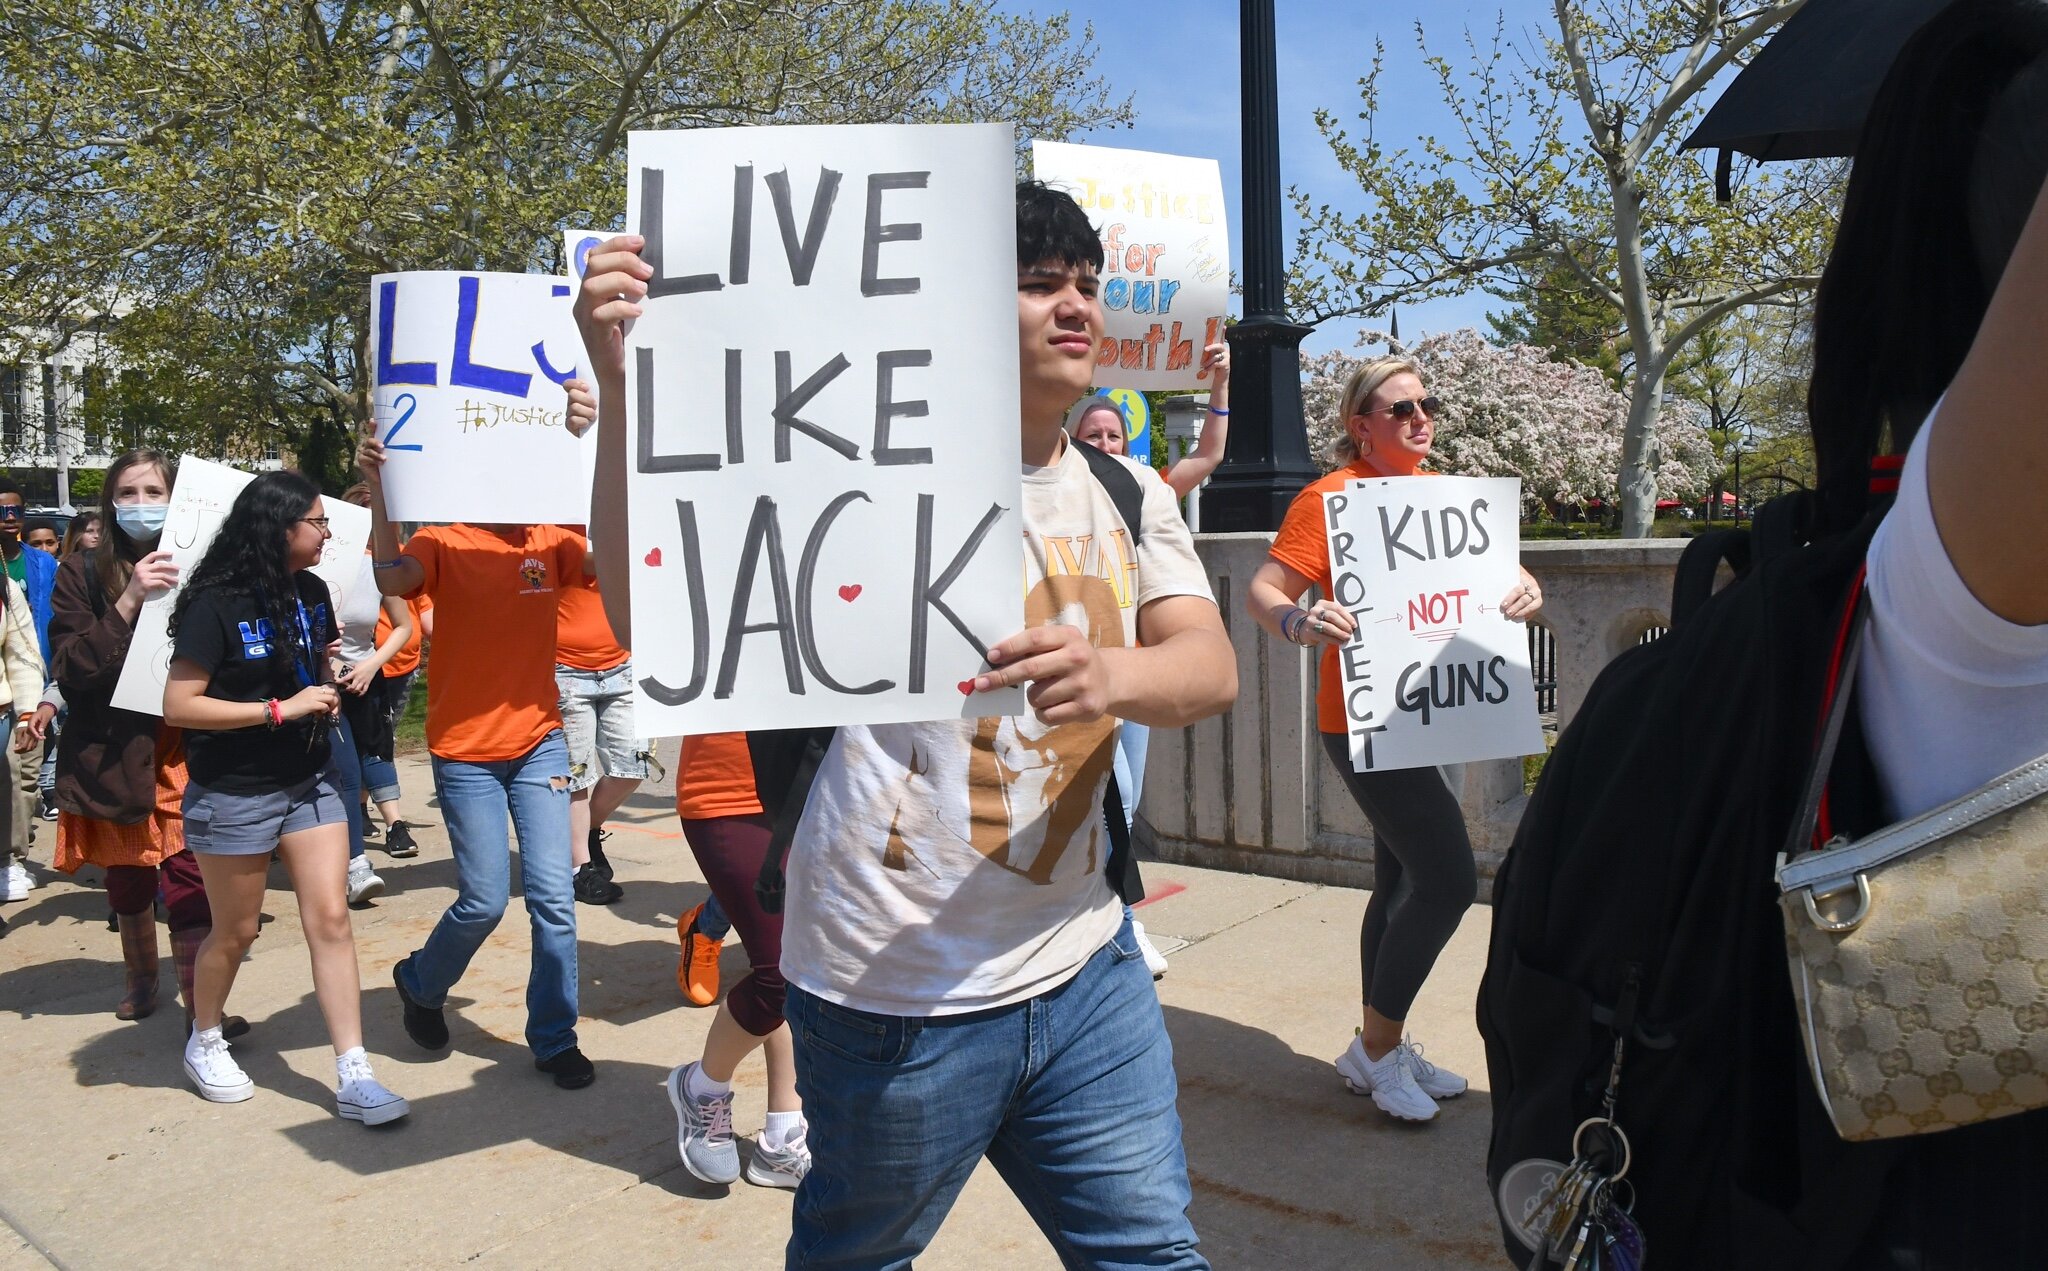 Scenes from the anti-gun violence march in downtown Battle Creek.